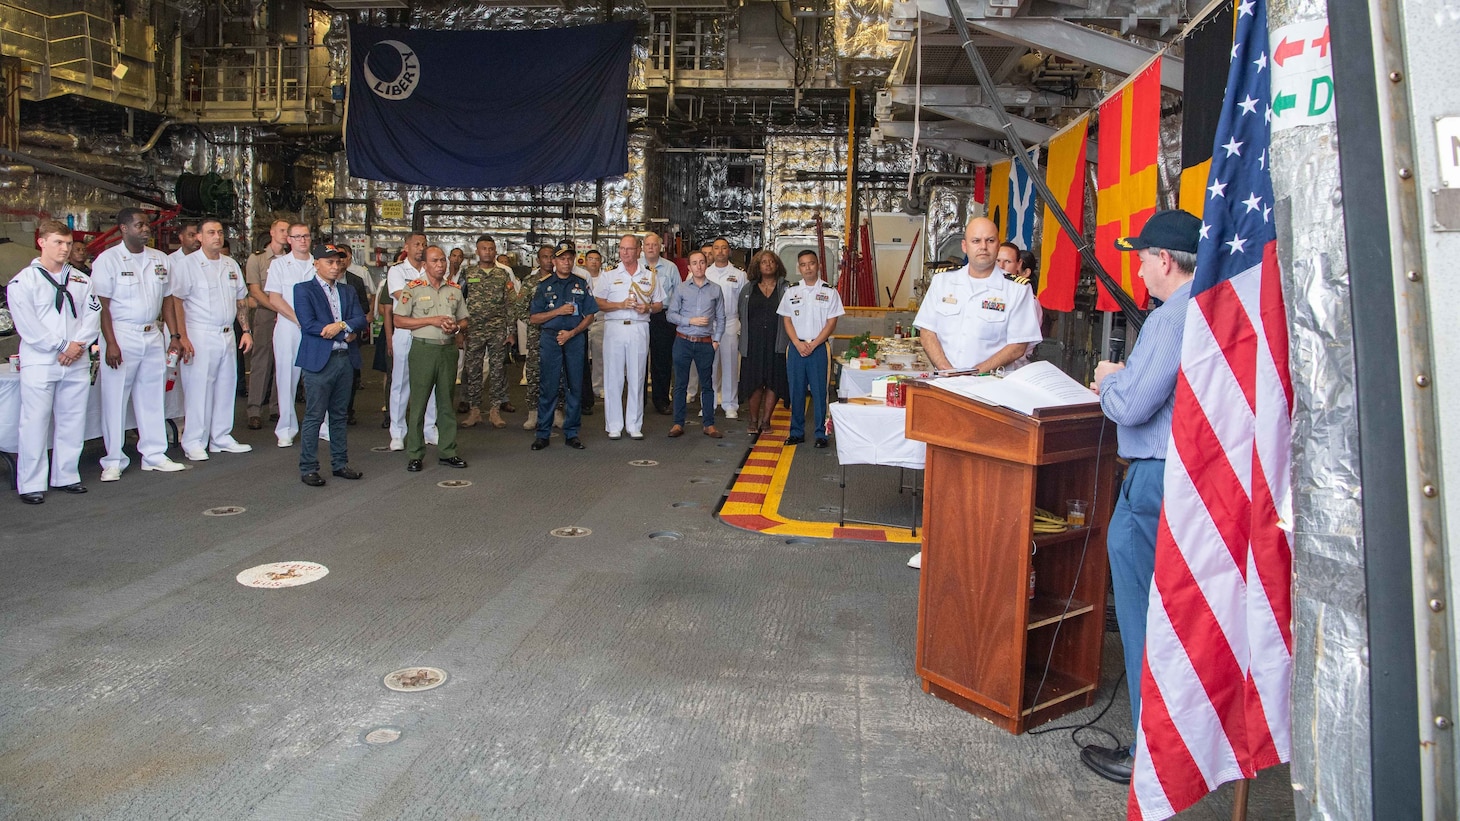 DILI, Timor-Leste (Dec. 8, 2021) Thomas E. Daley, charge d’affaires, United States Embassy Dili, Timor-Leste, speaks with Sailors at a reception aboard Independence-variant littoral combat ship USS Charleston (LCS 18), during a port visit to Dili, Timor-Leste. Charleston, part of Destroyer Squadron (DESRON) 7, is on a rotational deployment in the U.S. 7th Fleet area of operation to enhance interoperability with partners and serve as a ready-response force in support of a free and open Indo-Pacific region. (U.S. Navy photo by Mass Communication Specialist 2nd Class Ryan M. Breeden)